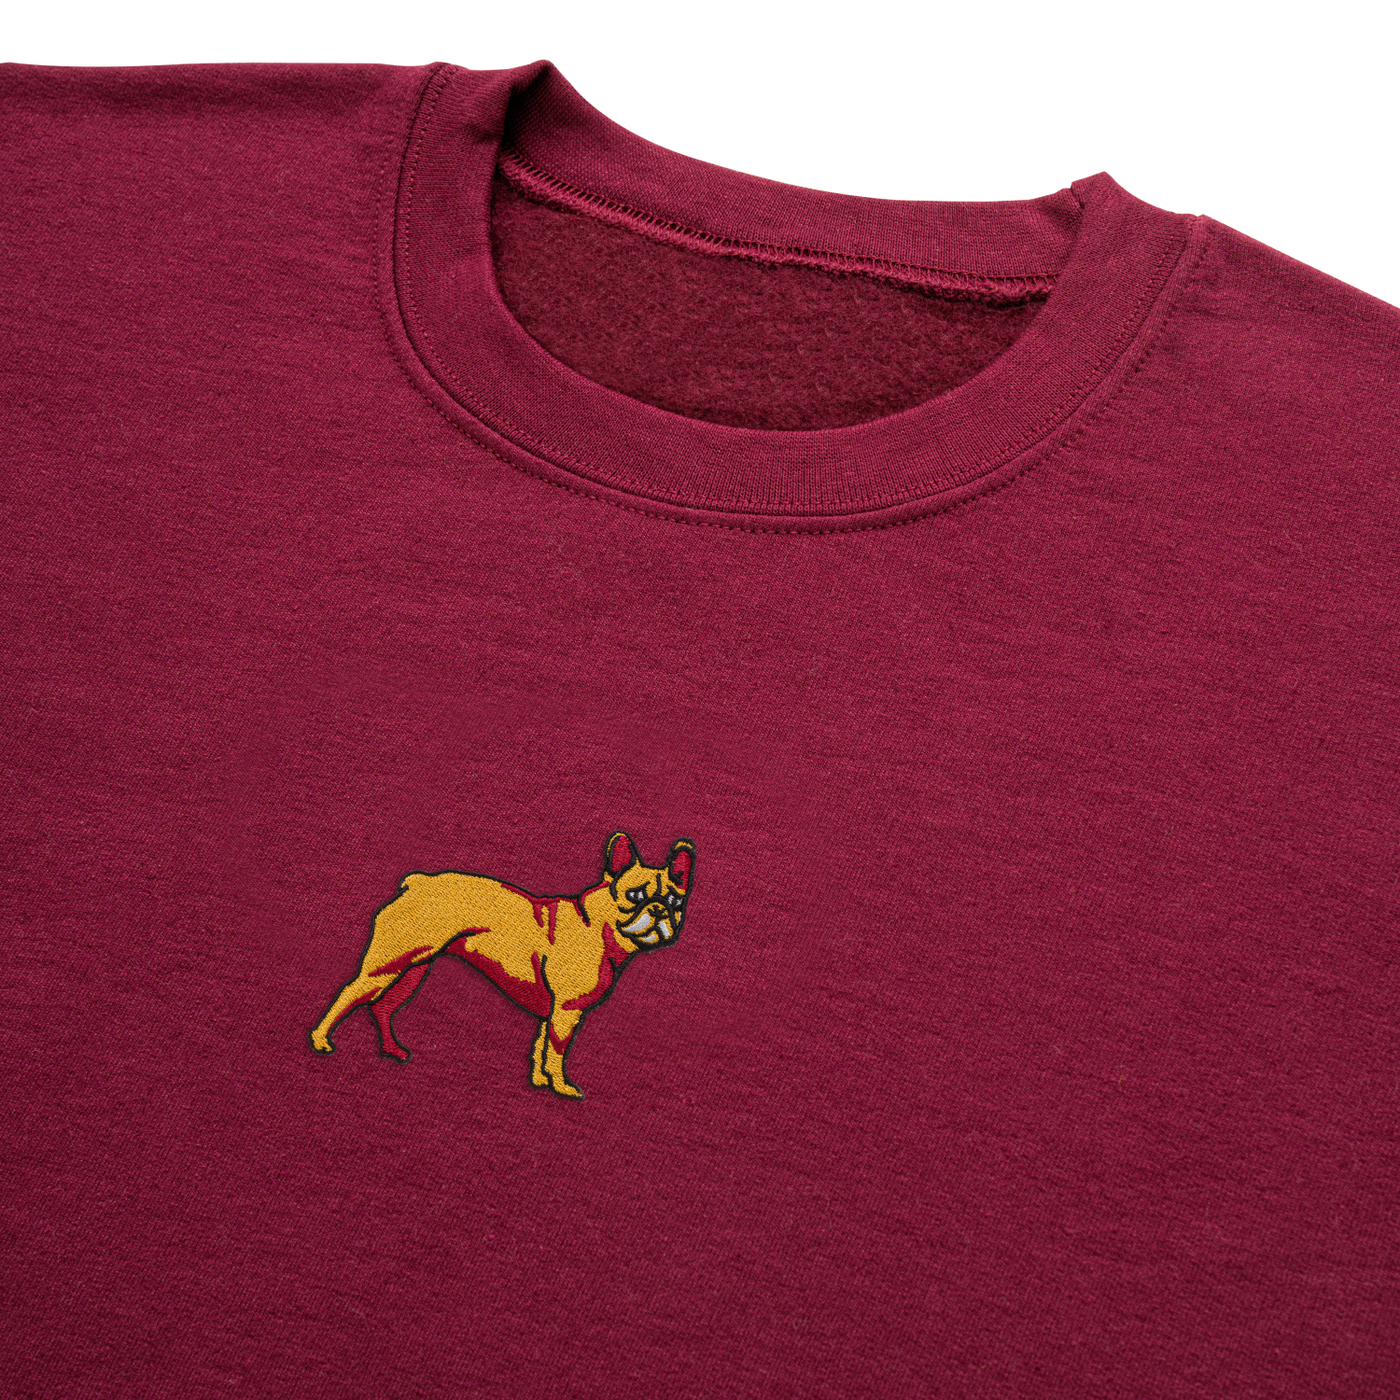 Bobby's Planet Men's Embroidered French Bulldog Sweatshirt from Paws Dog Cat Animals Collection in Maroon Color#color_maroon